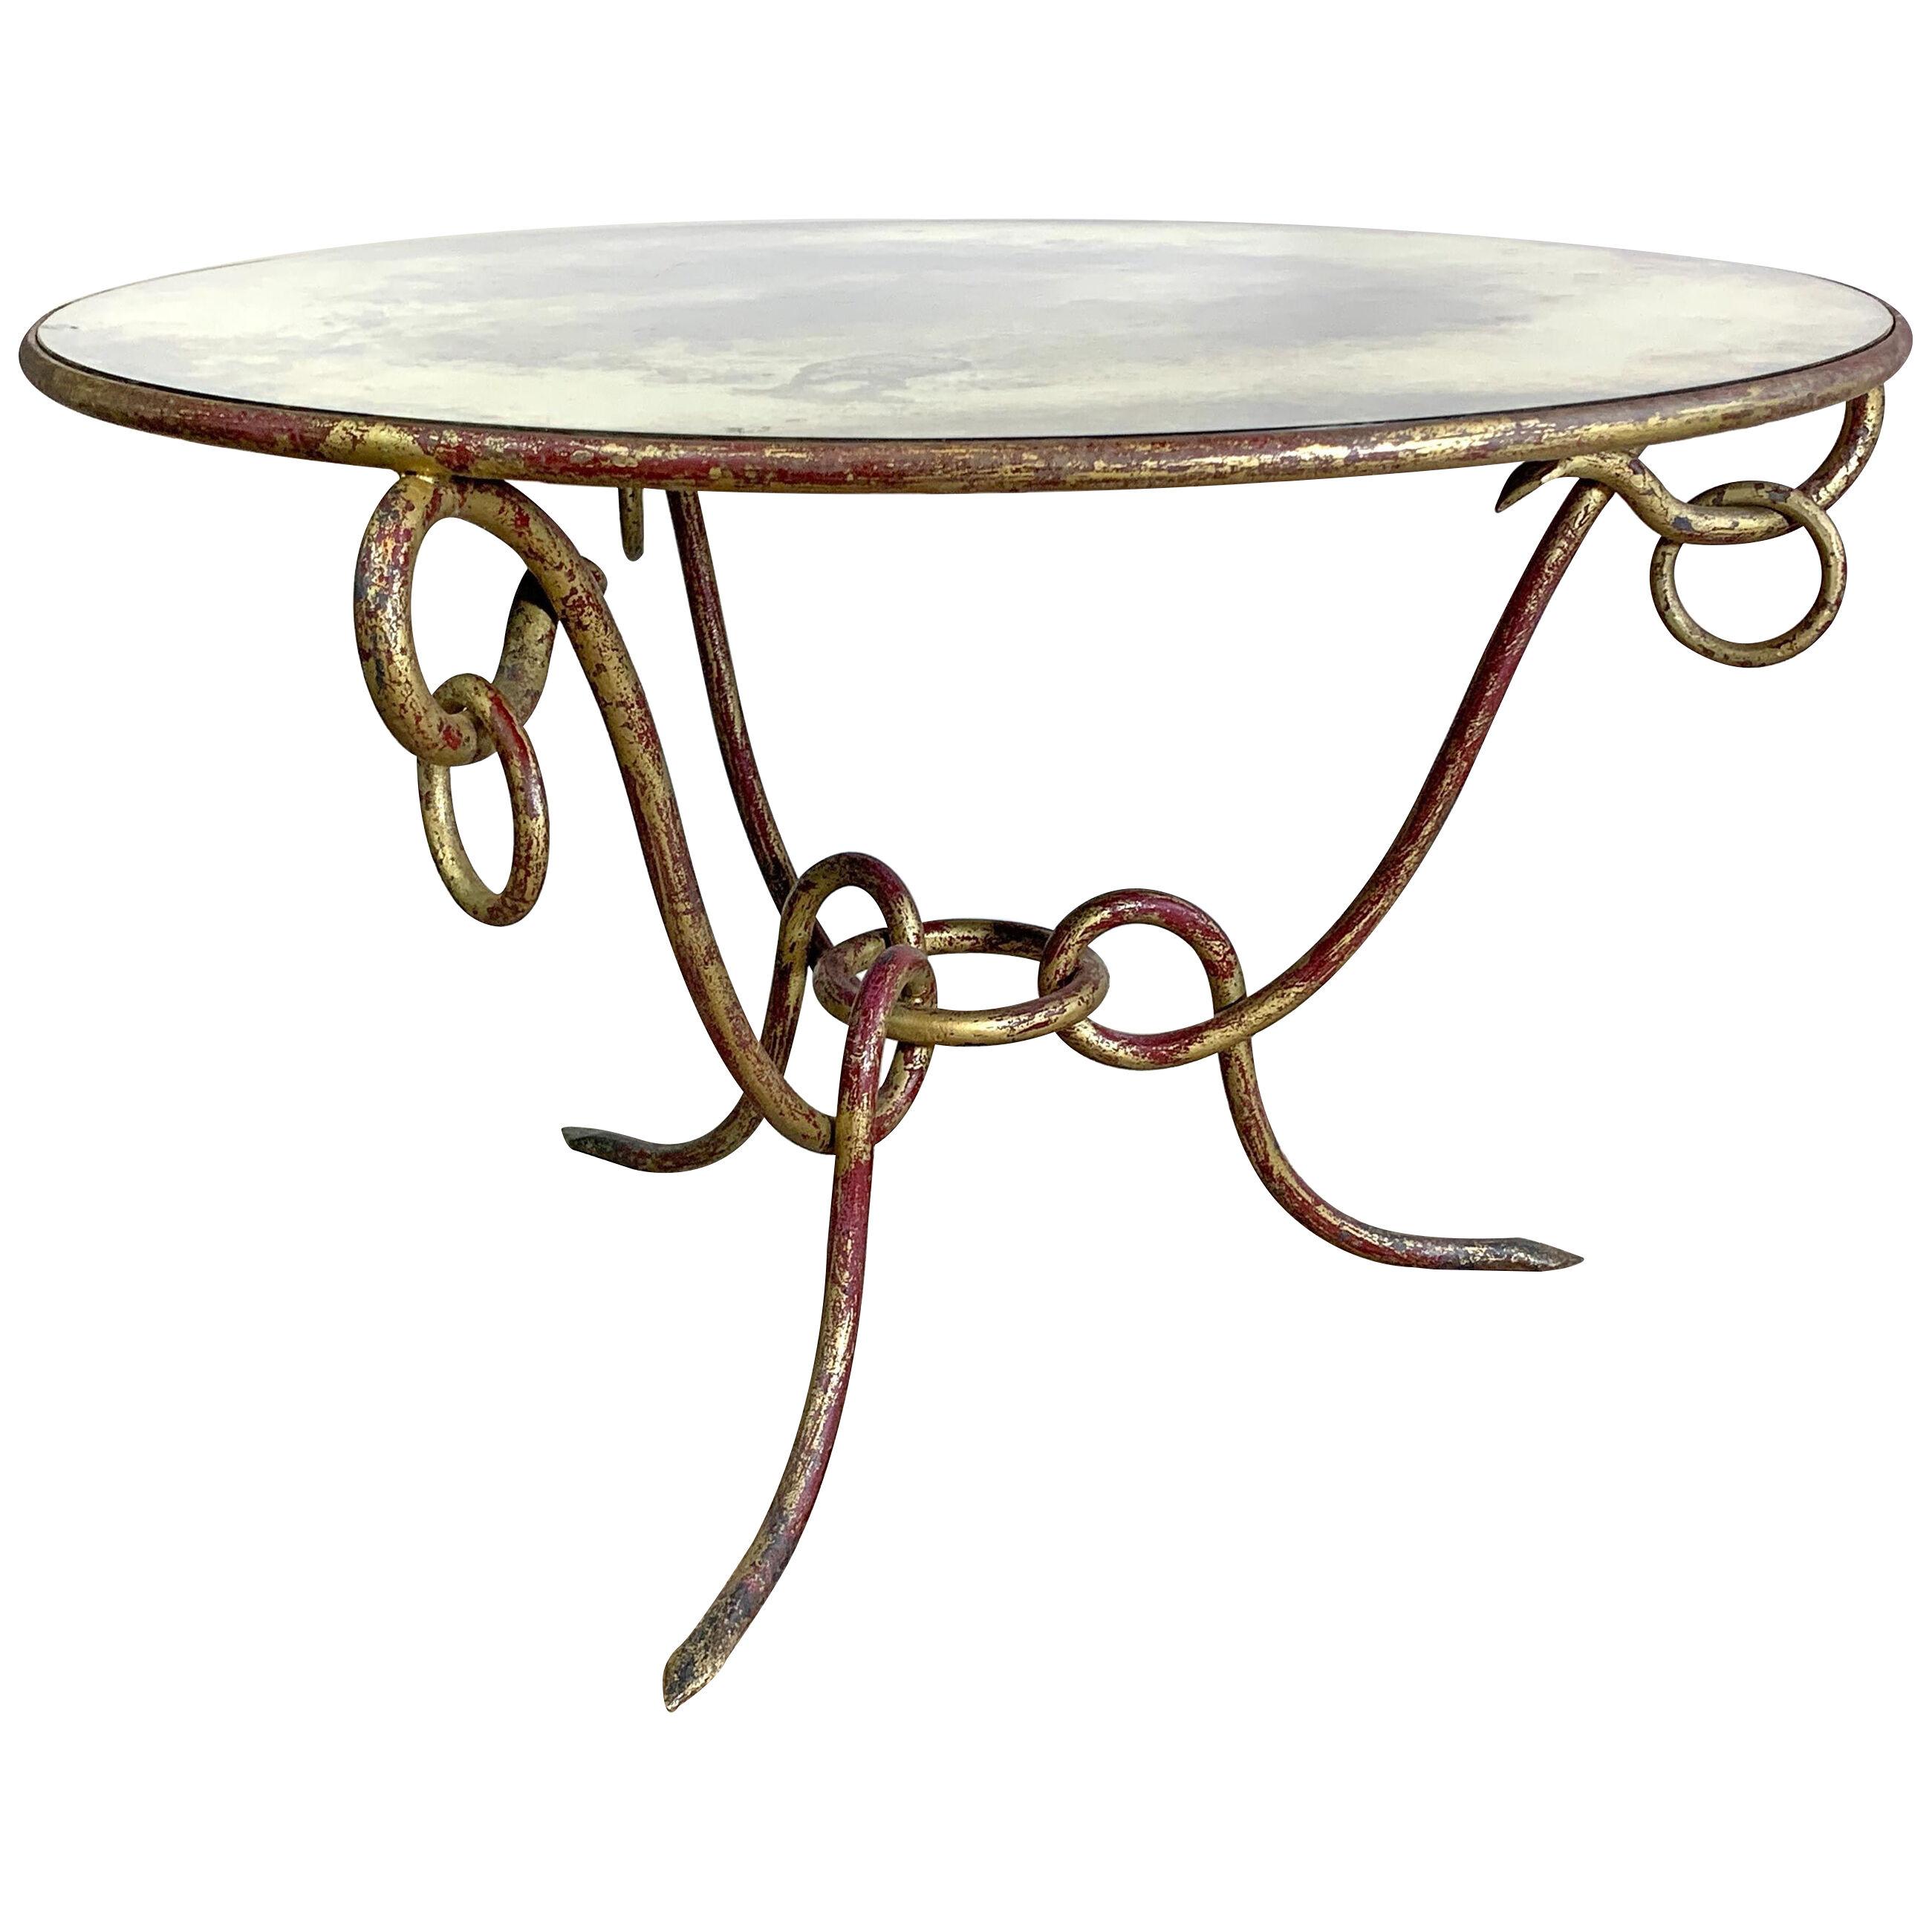 French Wrought Iron Gilt Coffee Table by Rene Drouet 1940’s